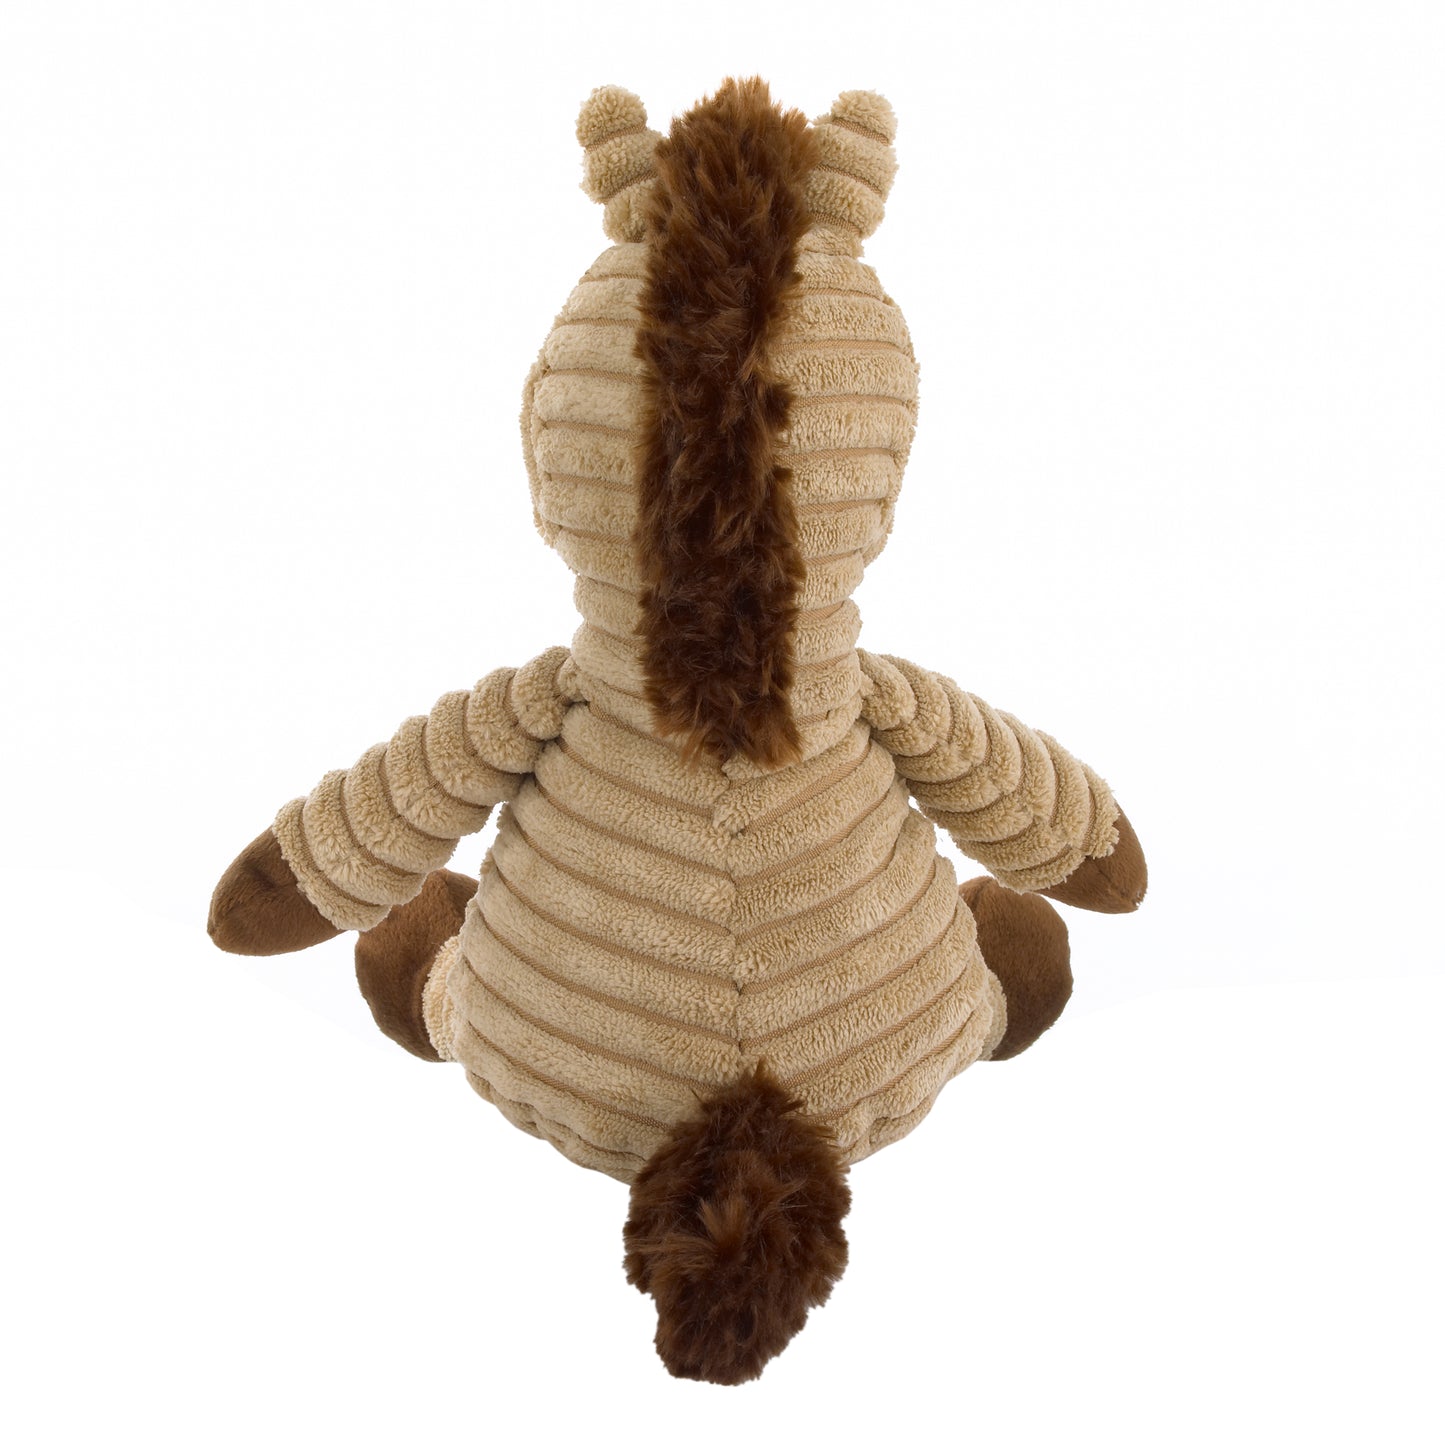 NoJo Dusty the Horse Tan and Brown Super Soft Plush Stuffed Animal